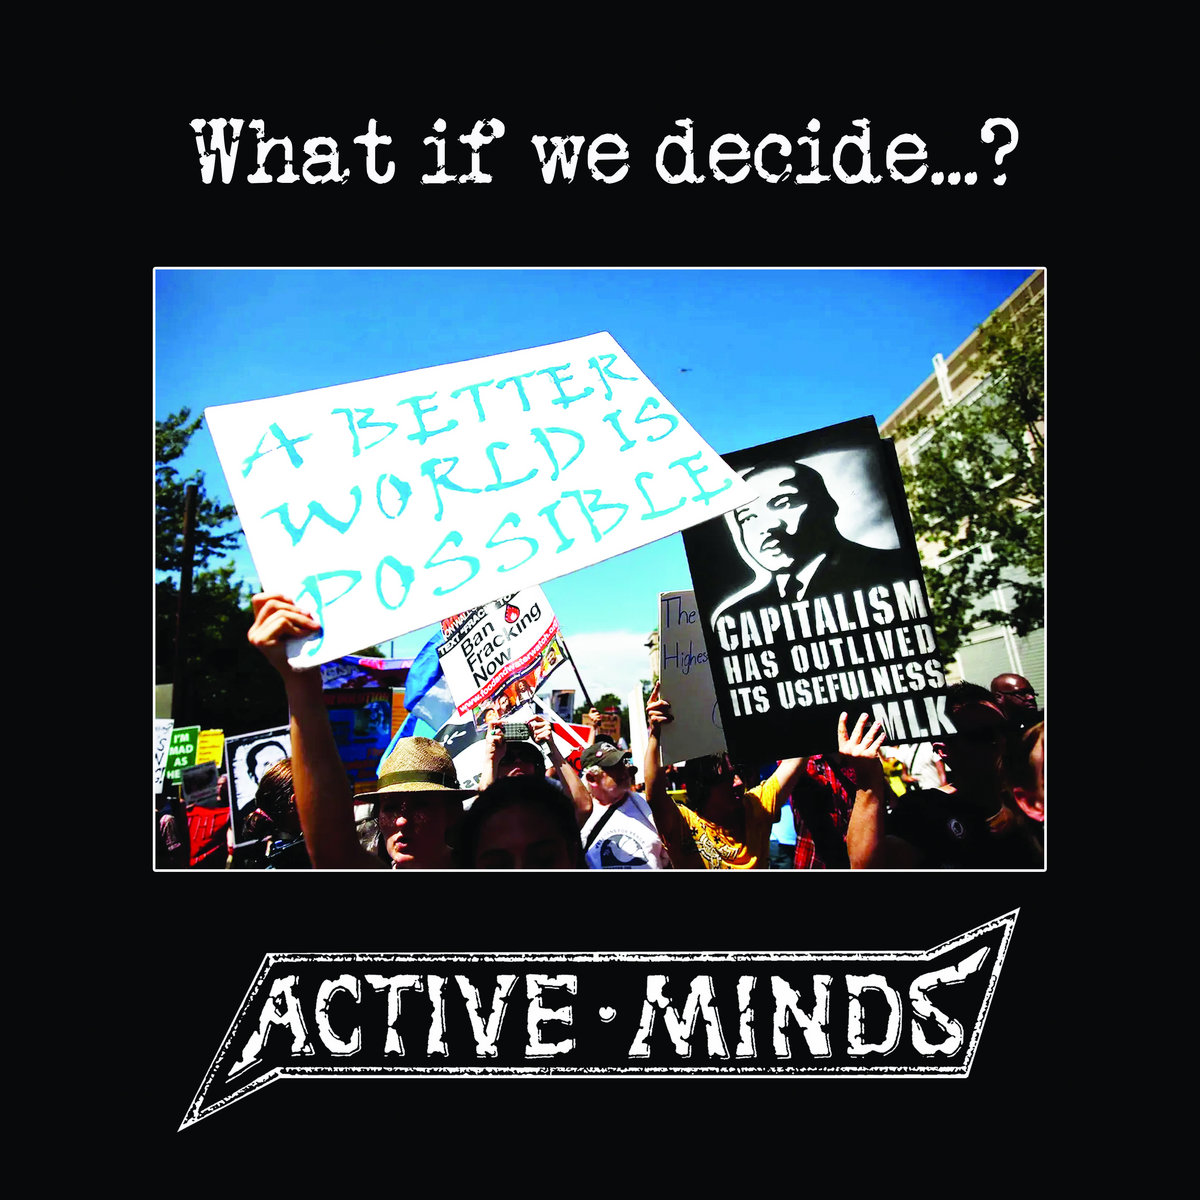 ACTIVE MINDS - What if we decide ...?